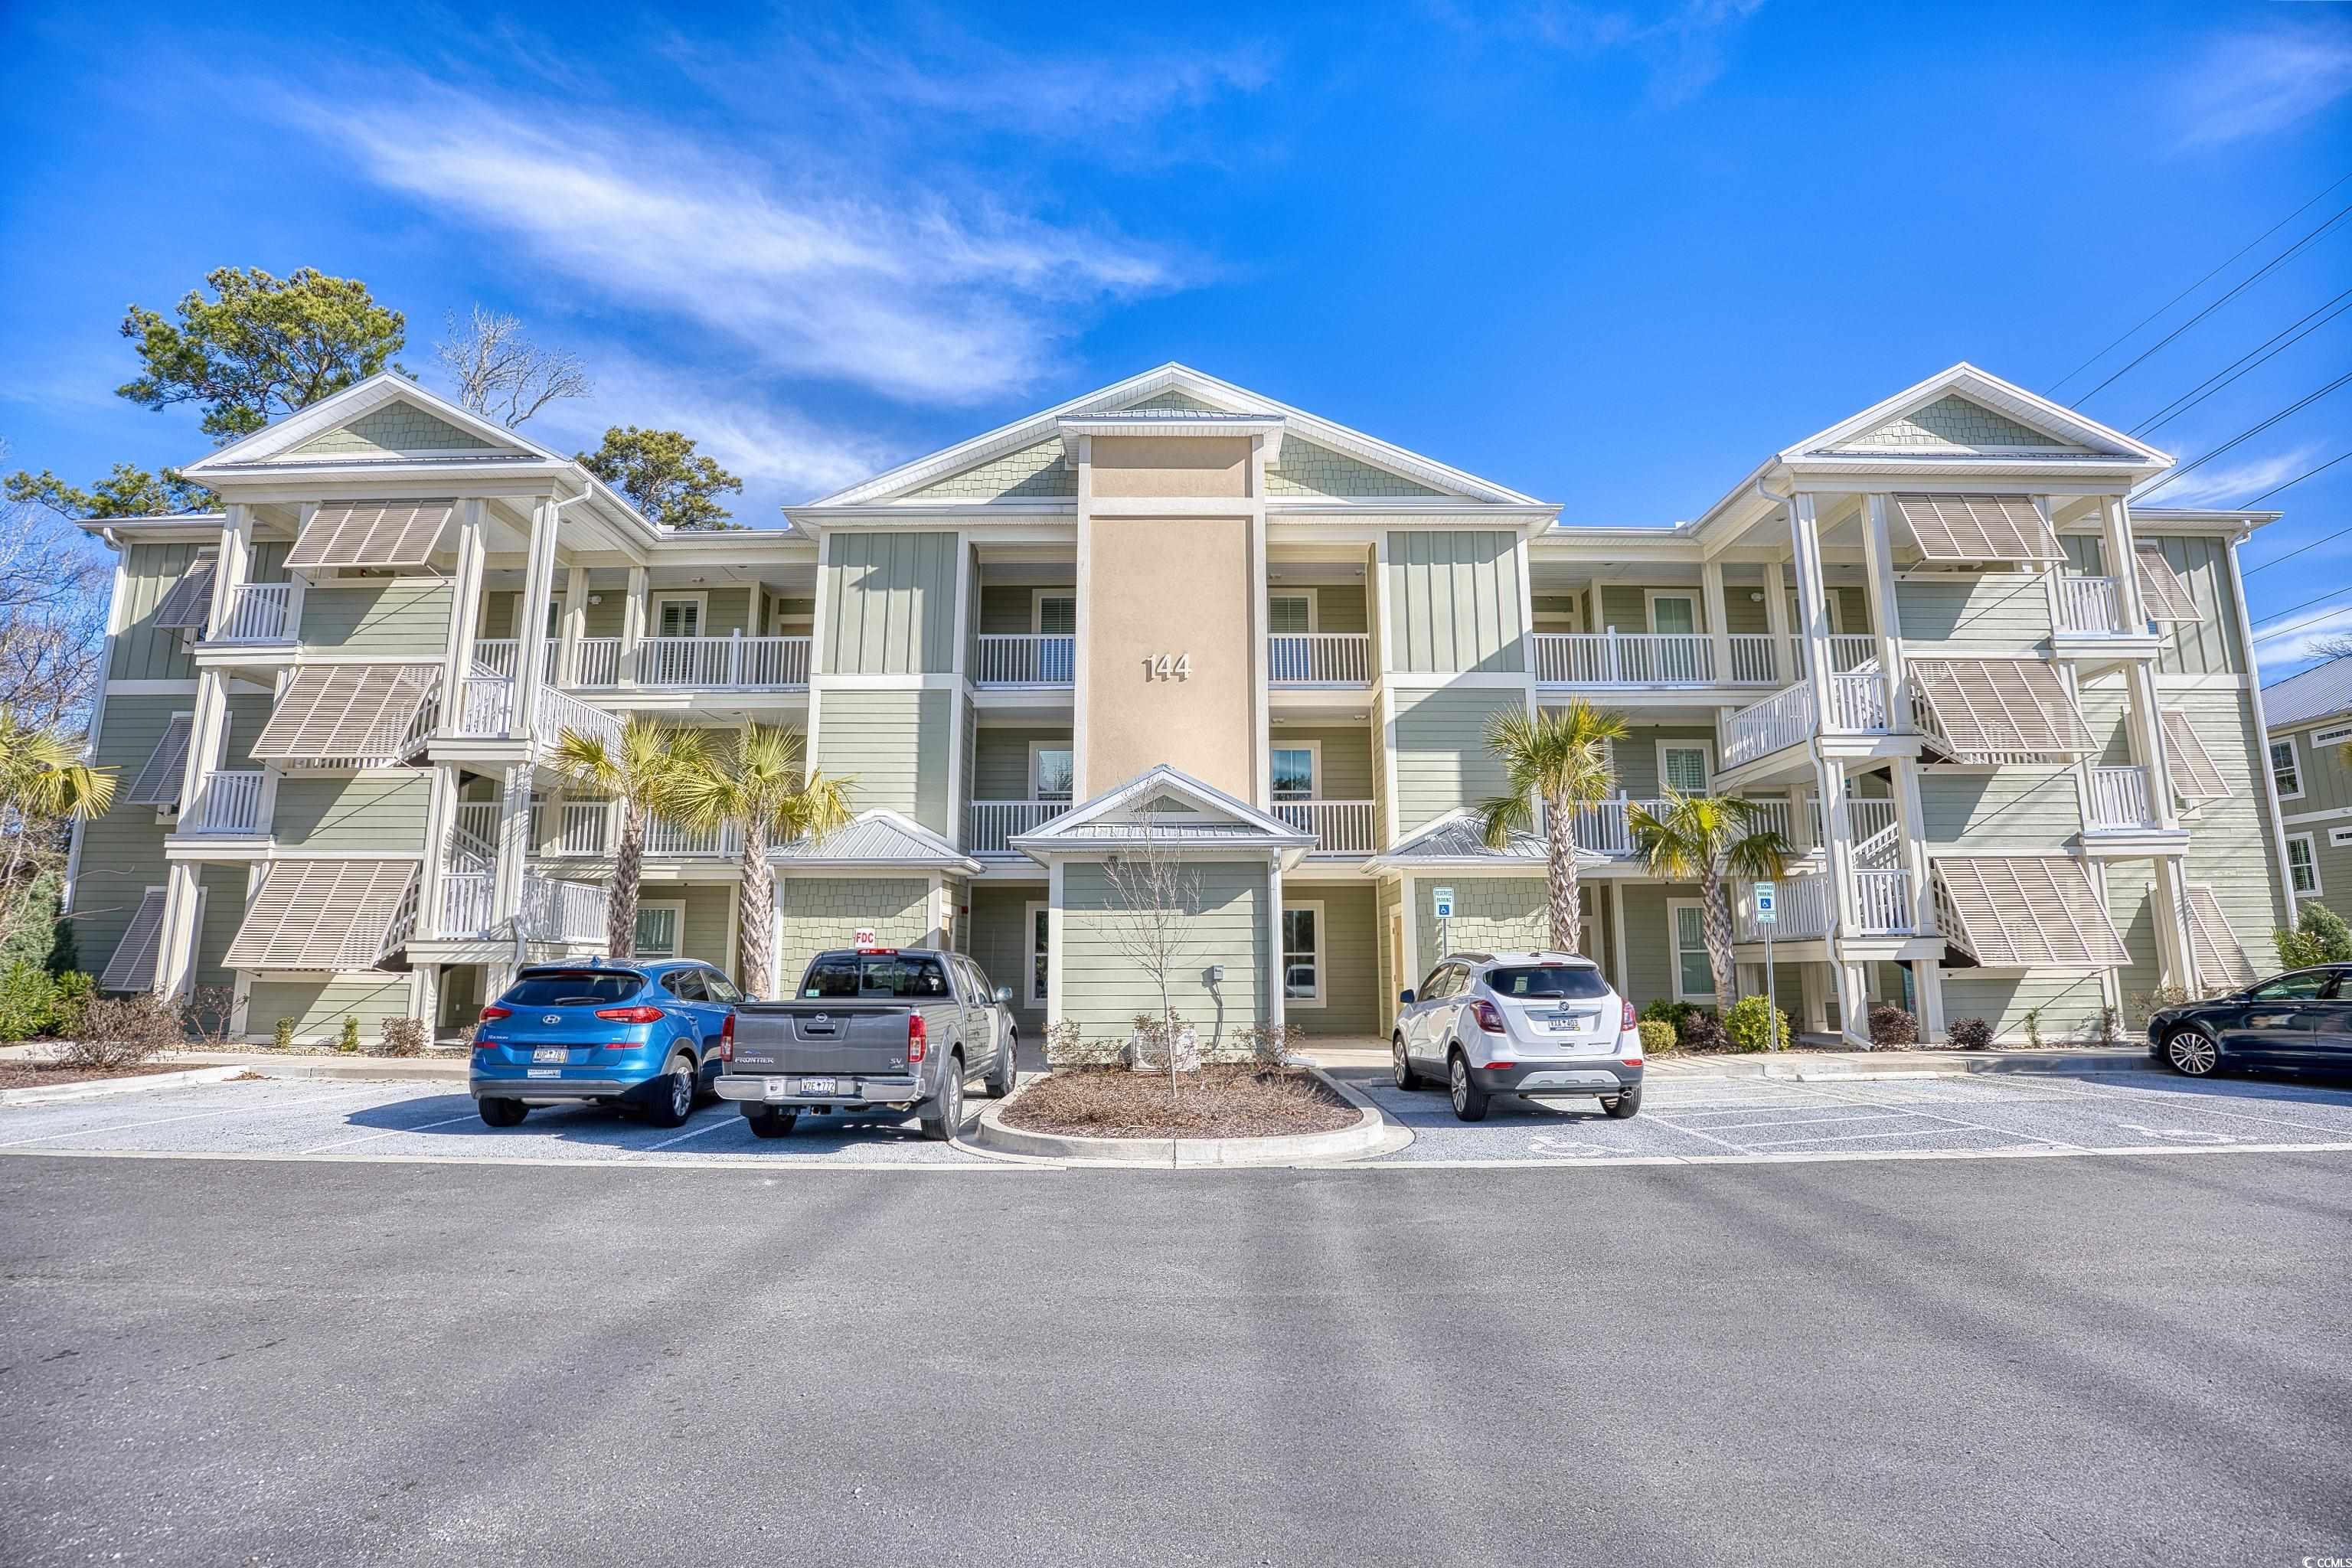 this is a fantastic opportunity to own a beautiful condo in pawleys island. this is an end unit with lots of light and a beautiful view of the lake and wetlands. the hardwood floors are an excellent feature that are even in the bedrooms. the kitchen has gorgeous cabinets that are soft close, granite counters, stainless appliances and a pantry. the spacious owner's suite features another great view, two walk in closets and a beautiful bathroom. the bathroom has granite counters and plenty of counter space. did i mention the view? you can also sit in the screened porch and take in the natural surroundings. there is a laundry room with commercial grade washer and dryer and a closet for more storage. plus, this unit has not been lived in! if you don't like stairs, no problem because there is an elevator. you can enjoy the community pool and the carolina weather or grill by the pool. make an appointment today, you won't be disappointed. square footage is approximate and not guaranteed. buyer is responsible for verification.